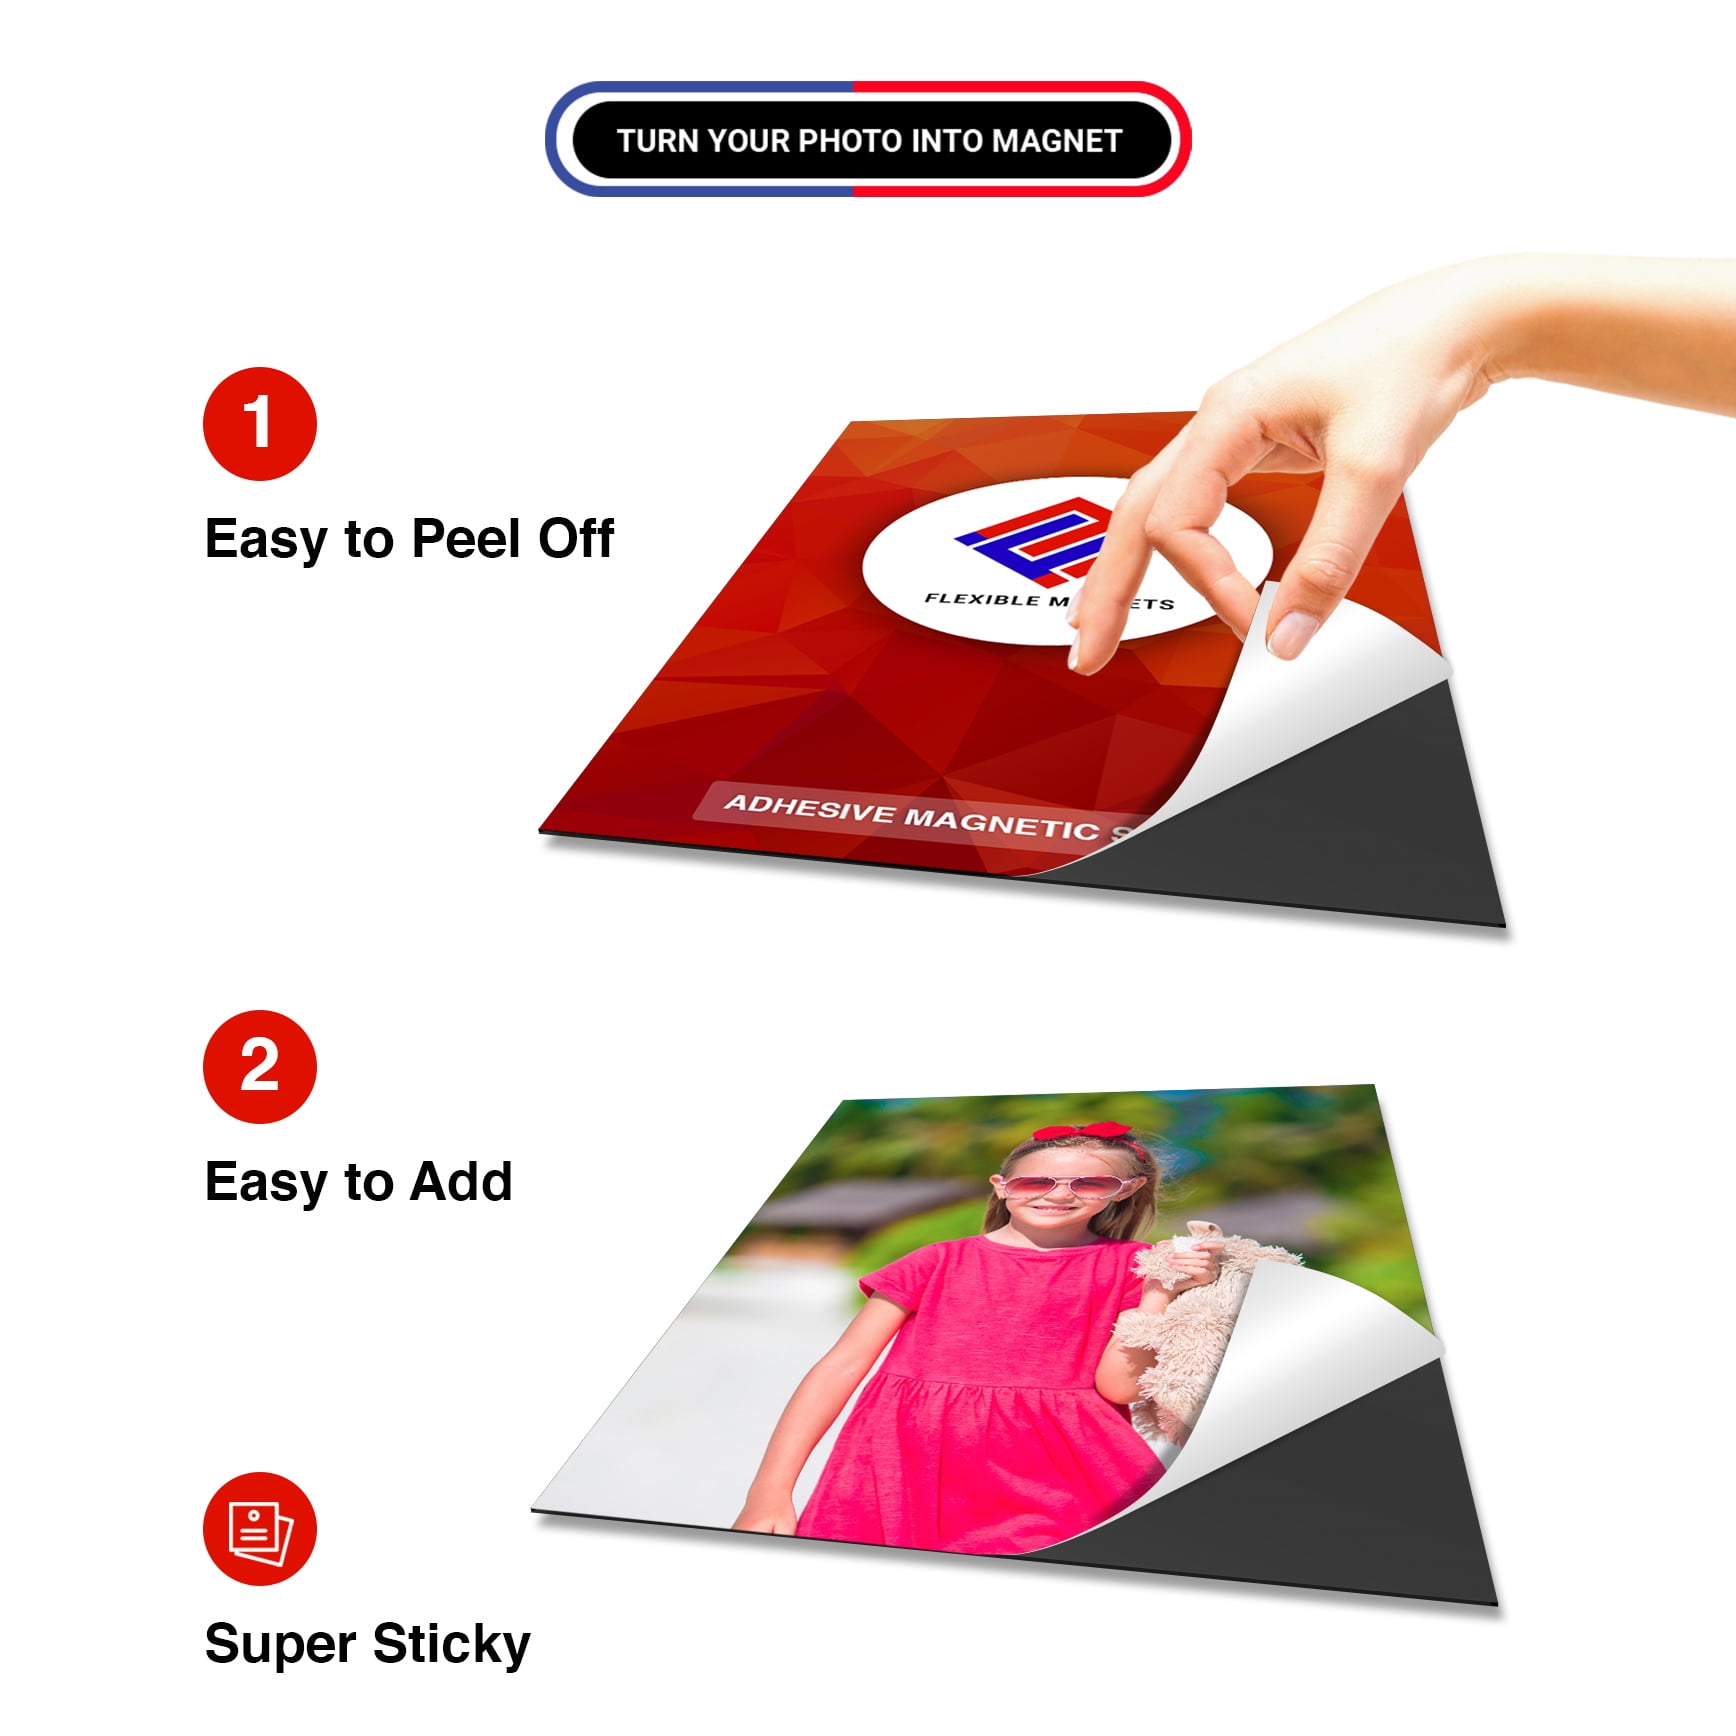 Ultimate Magnet 4 x 6 Flexible Magnet Sheets with Peel and Stick Self Adhesive Backing 20 Pack 